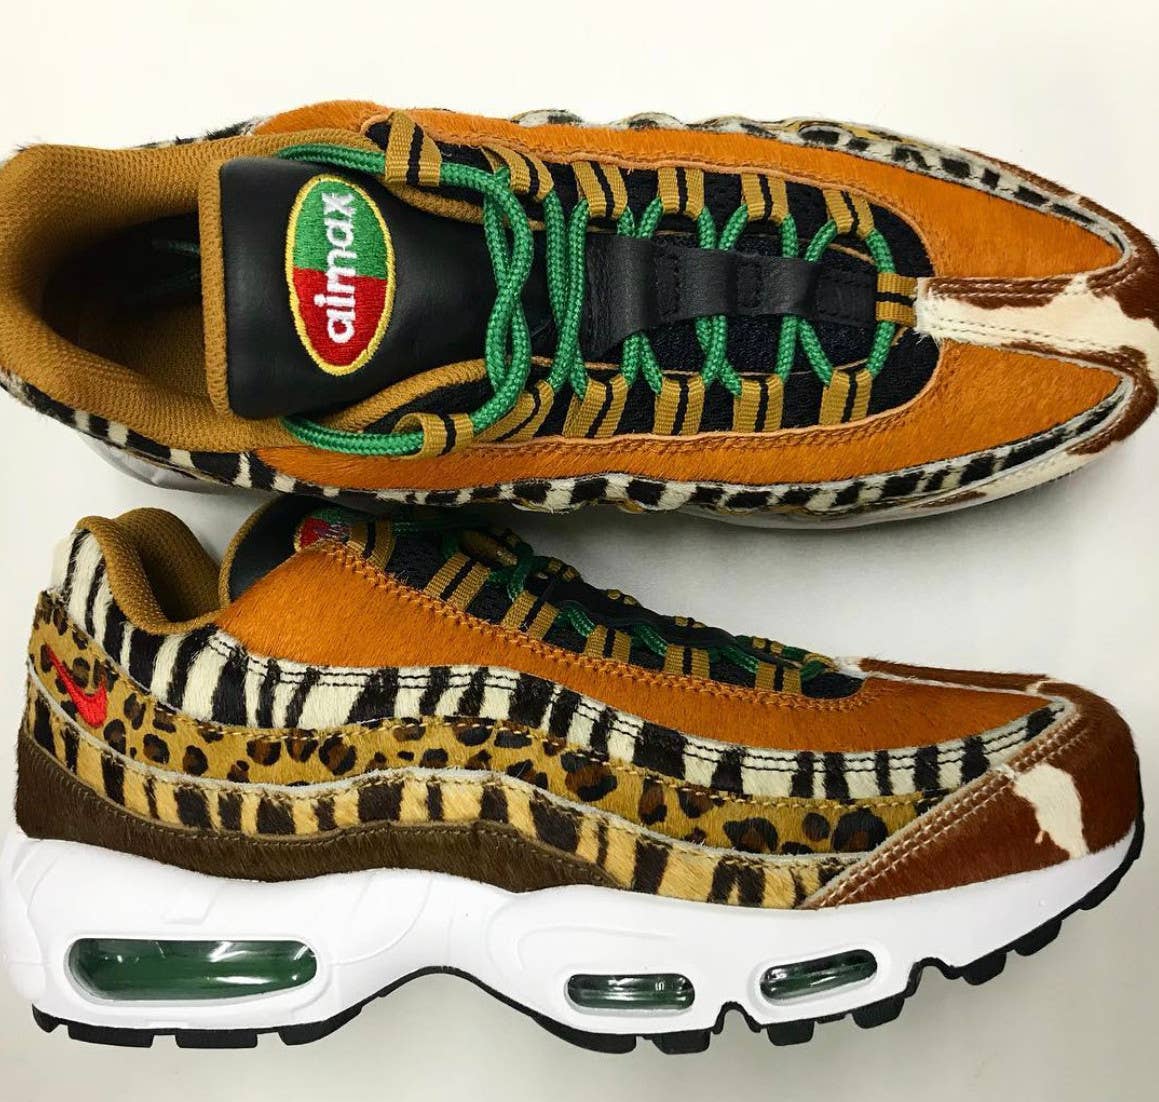 There's Friends and Family 'Animal' Atmos x Air Max 95 Complex